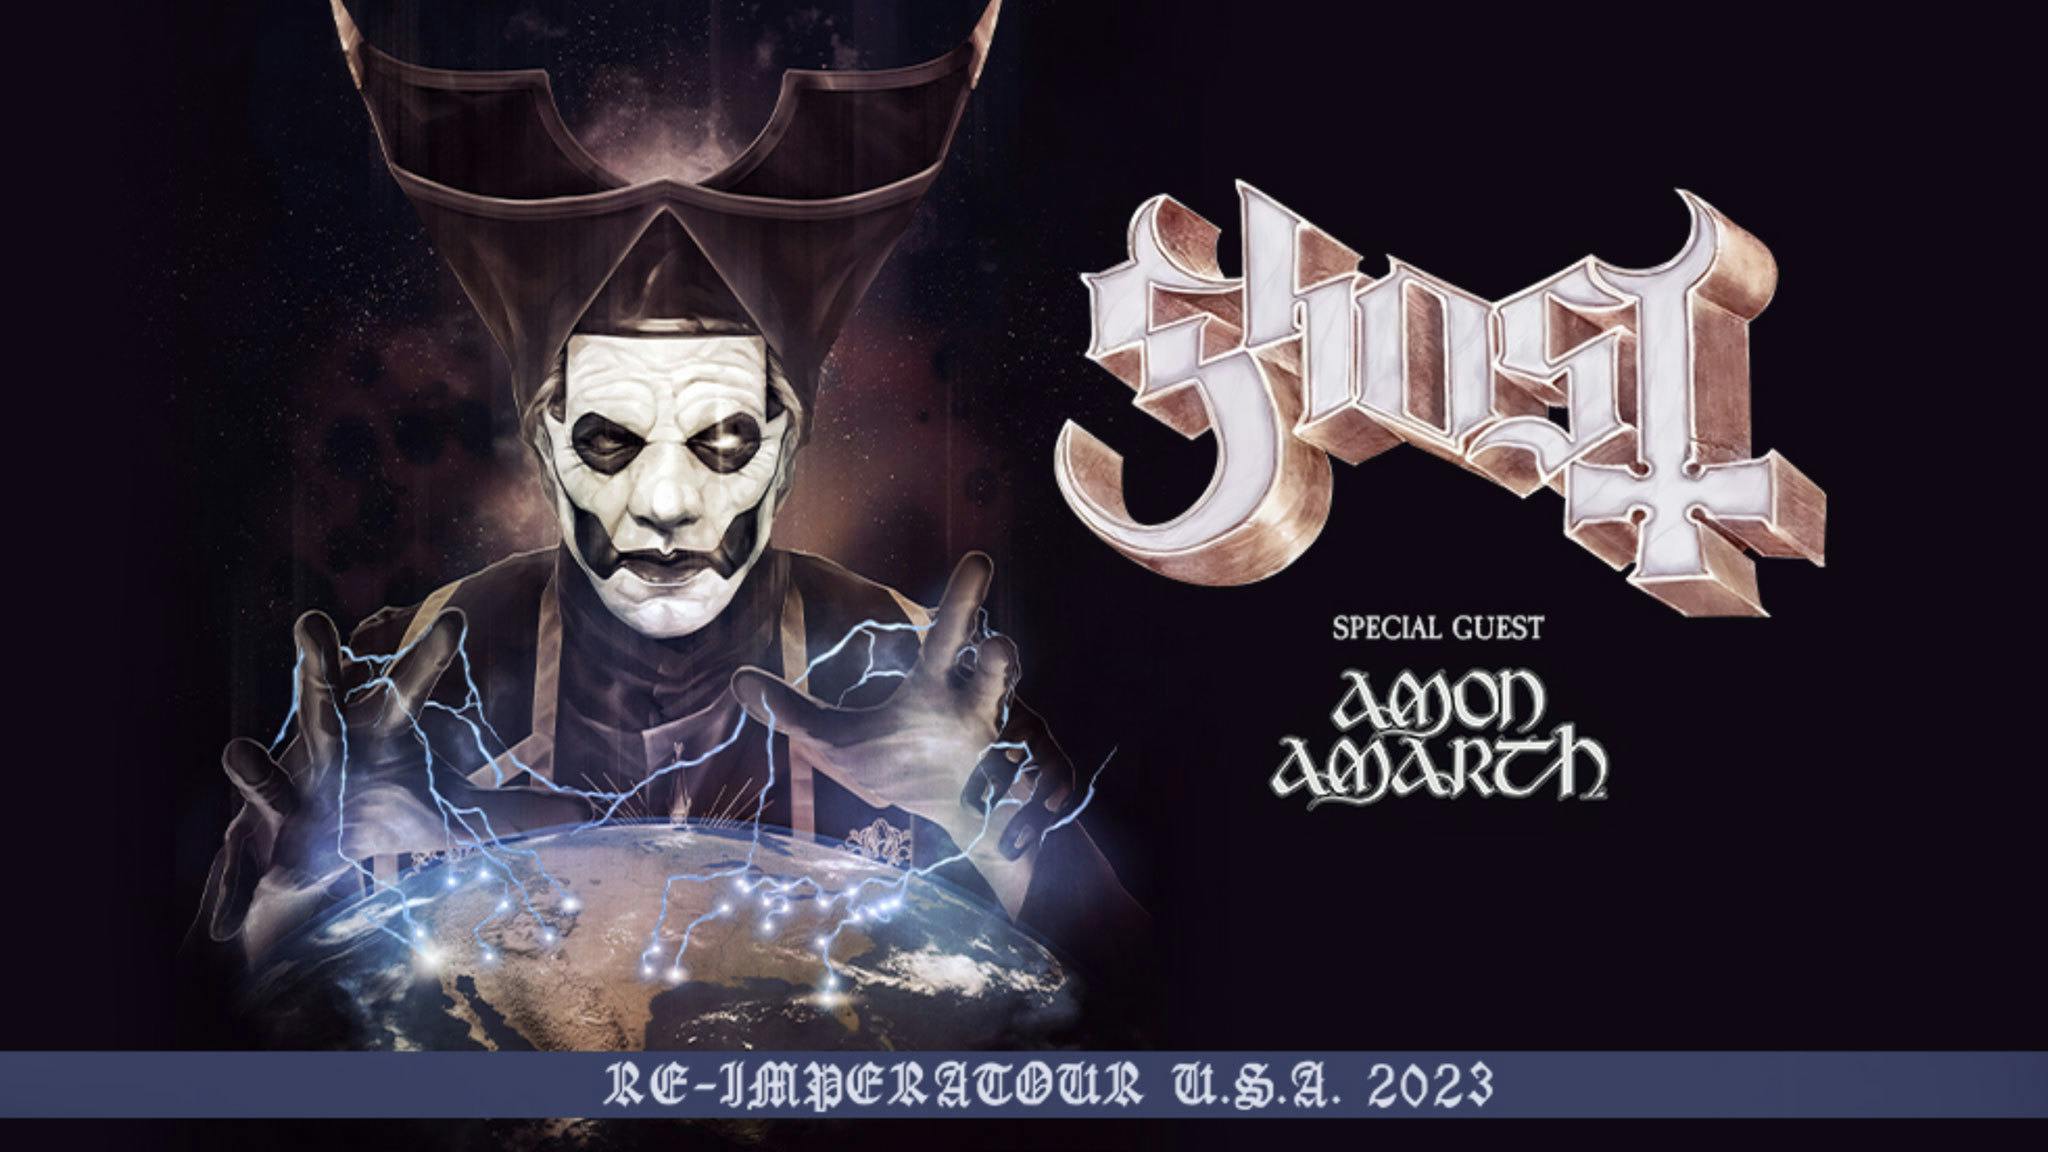 Ghost confirm huge 27-date Re-Imperatour with Amon Amarth